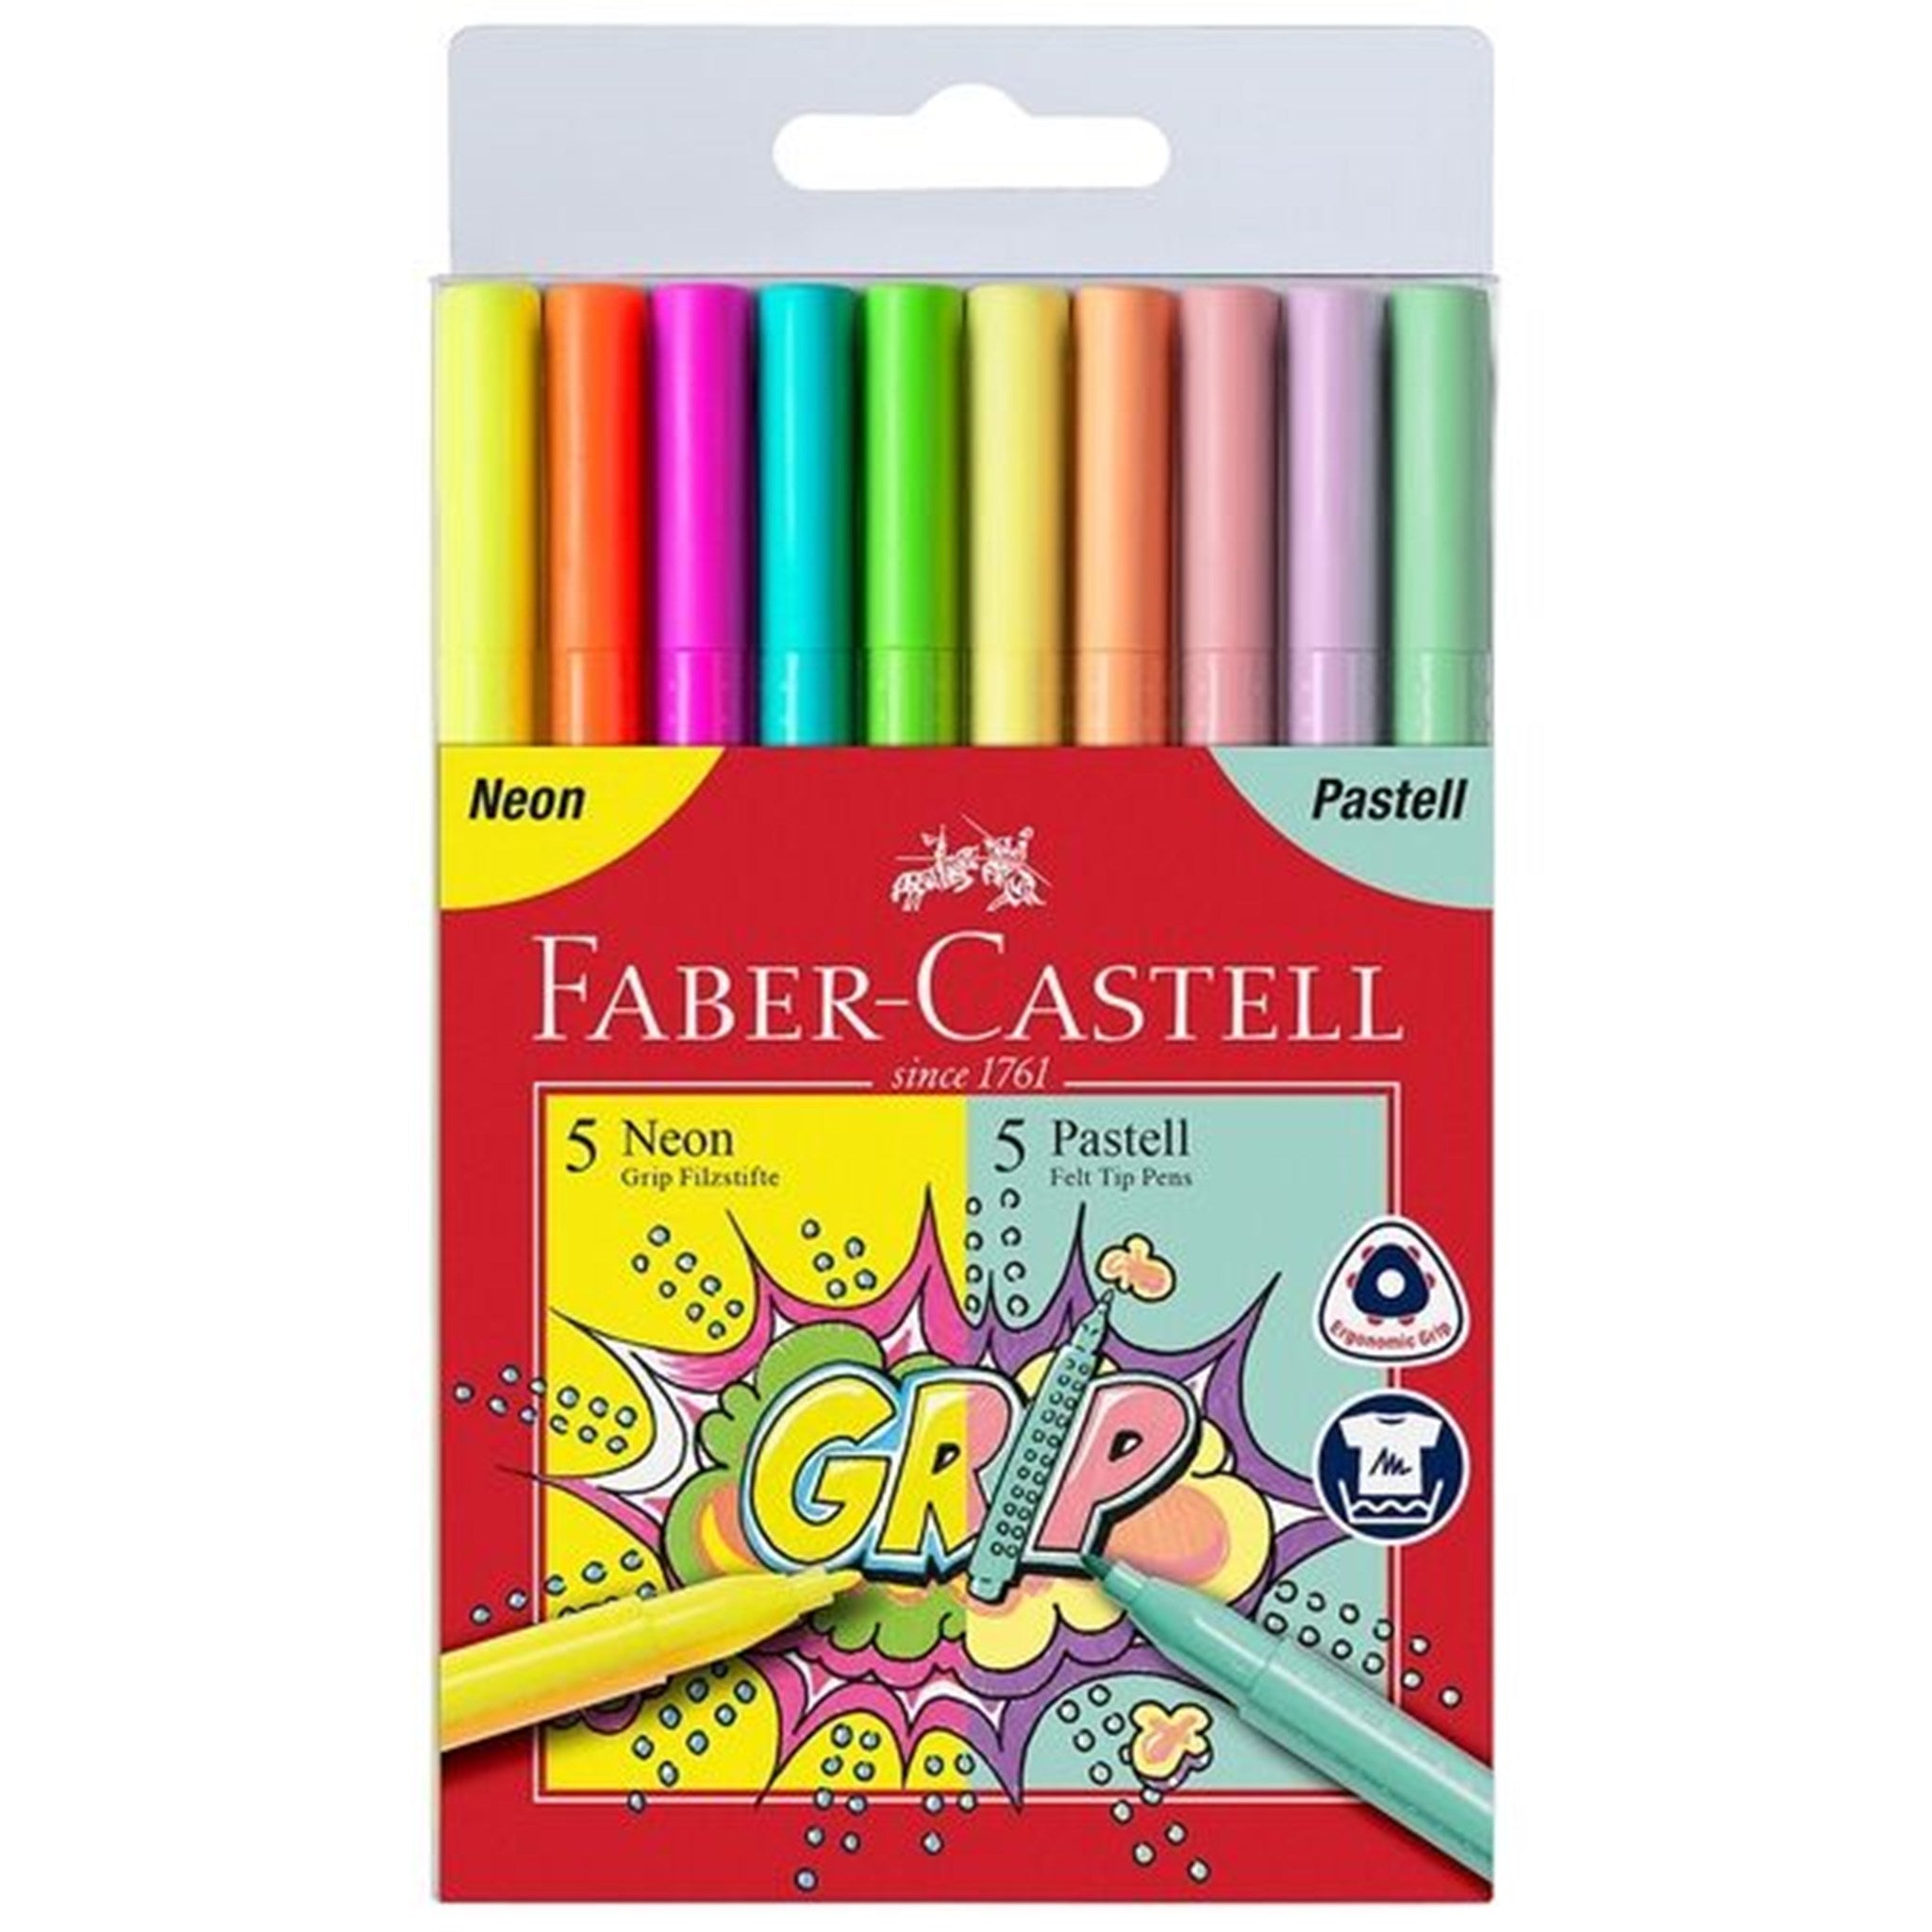 Faber Castell Grip 10 Pencils Neon- and Pastel Colors